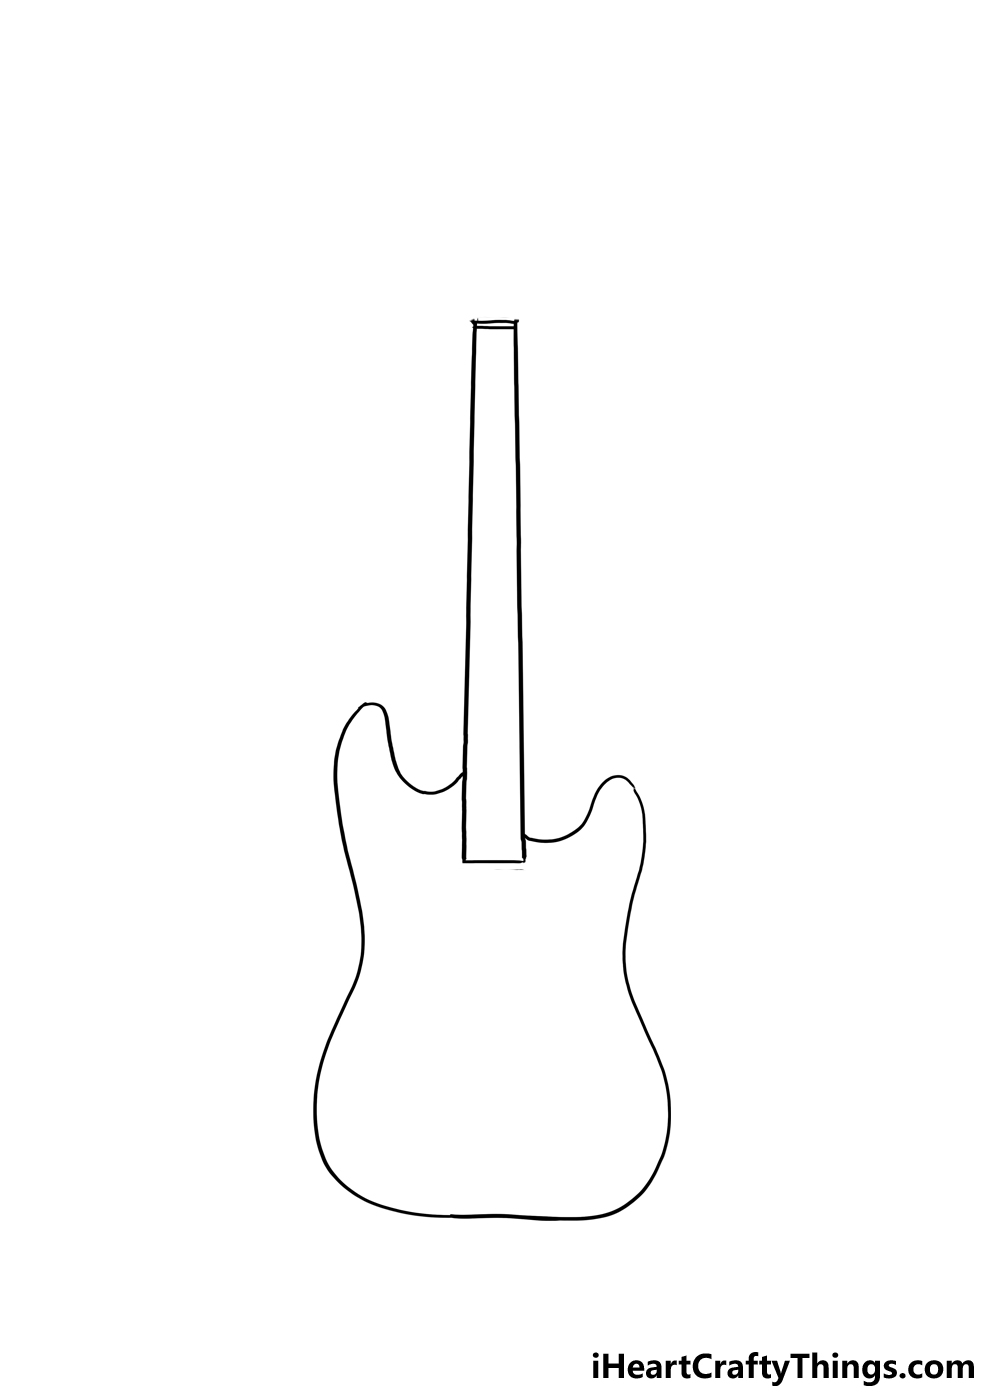 How to Draw An Electric Guitar step 2